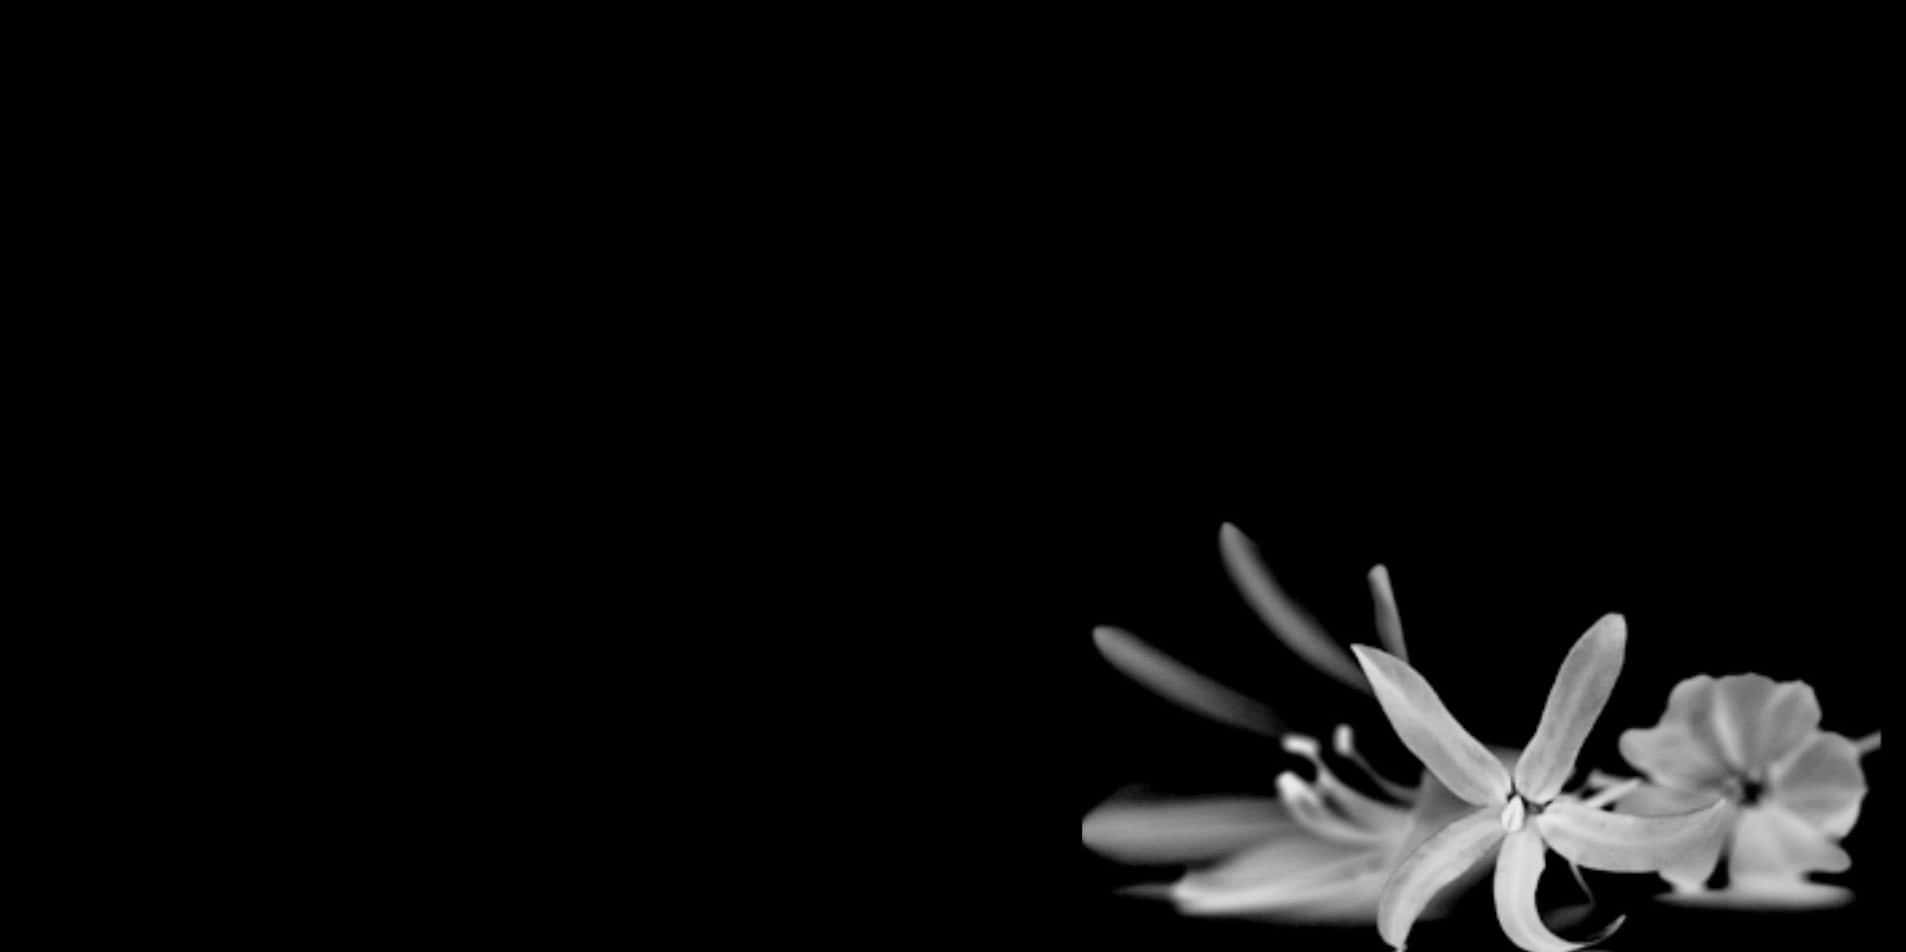 A Black And White Photo Of Flowers